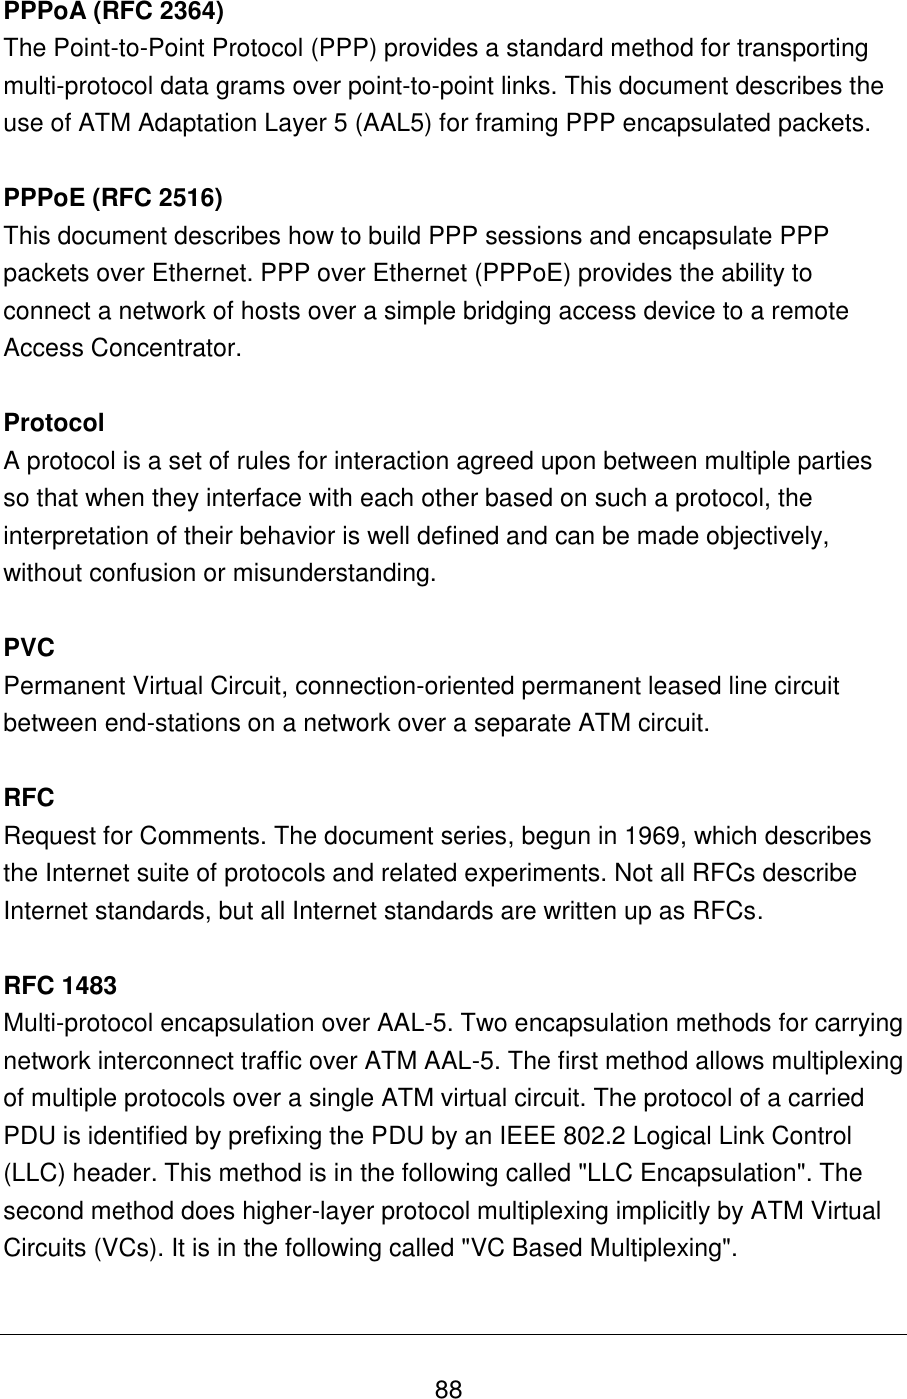   88 PPPoA (RFC 2364) The Point-to-Point Protocol (PPP) provides a standard method for transporting multi-protocol data grams over point-to-point links. This document describes the use of ATM Adaptation Layer 5 (AAL5) for framing PPP encapsulated packets.  PPPoE (RFC 2516) This document describes how to build PPP sessions and encapsulate PPP packets over Ethernet. PPP over Ethernet (PPPoE) provides the ability to connect a network of hosts over a simple bridging access device to a remote Access Concentrator.  Protocol A protocol is a set of rules for interaction agreed upon between multiple parties so that when they interface with each other based on such a protocol, the interpretation of their behavior is well defined and can be made objectively, without confusion or misunderstanding.   PVC Permanent Virtual Circuit, connection-oriented permanent leased line circuit between end-stations on a network over a separate ATM circuit.  RFC Request for Comments. The document series, begun in 1969, which describes the Internet suite of protocols and related experiments. Not all RFCs describe Internet standards, but all Internet standards are written up as RFCs.  RFC 1483 Multi-protocol encapsulation over AAL-5. Two encapsulation methods for carrying network interconnect traffic over ATM AAL-5. The first method allows multiplexing of multiple protocols over a single ATM virtual circuit. The protocol of a carried PDU is identified by prefixing the PDU by an IEEE 802.2 Logical Link Control (LLC) header. This method is in the following called &quot;LLC Encapsulation&quot;. The second method does higher-layer protocol multiplexing implicitly by ATM Virtual Circuits (VCs). It is in the following called &quot;VC Based Multiplexing&quot;.  